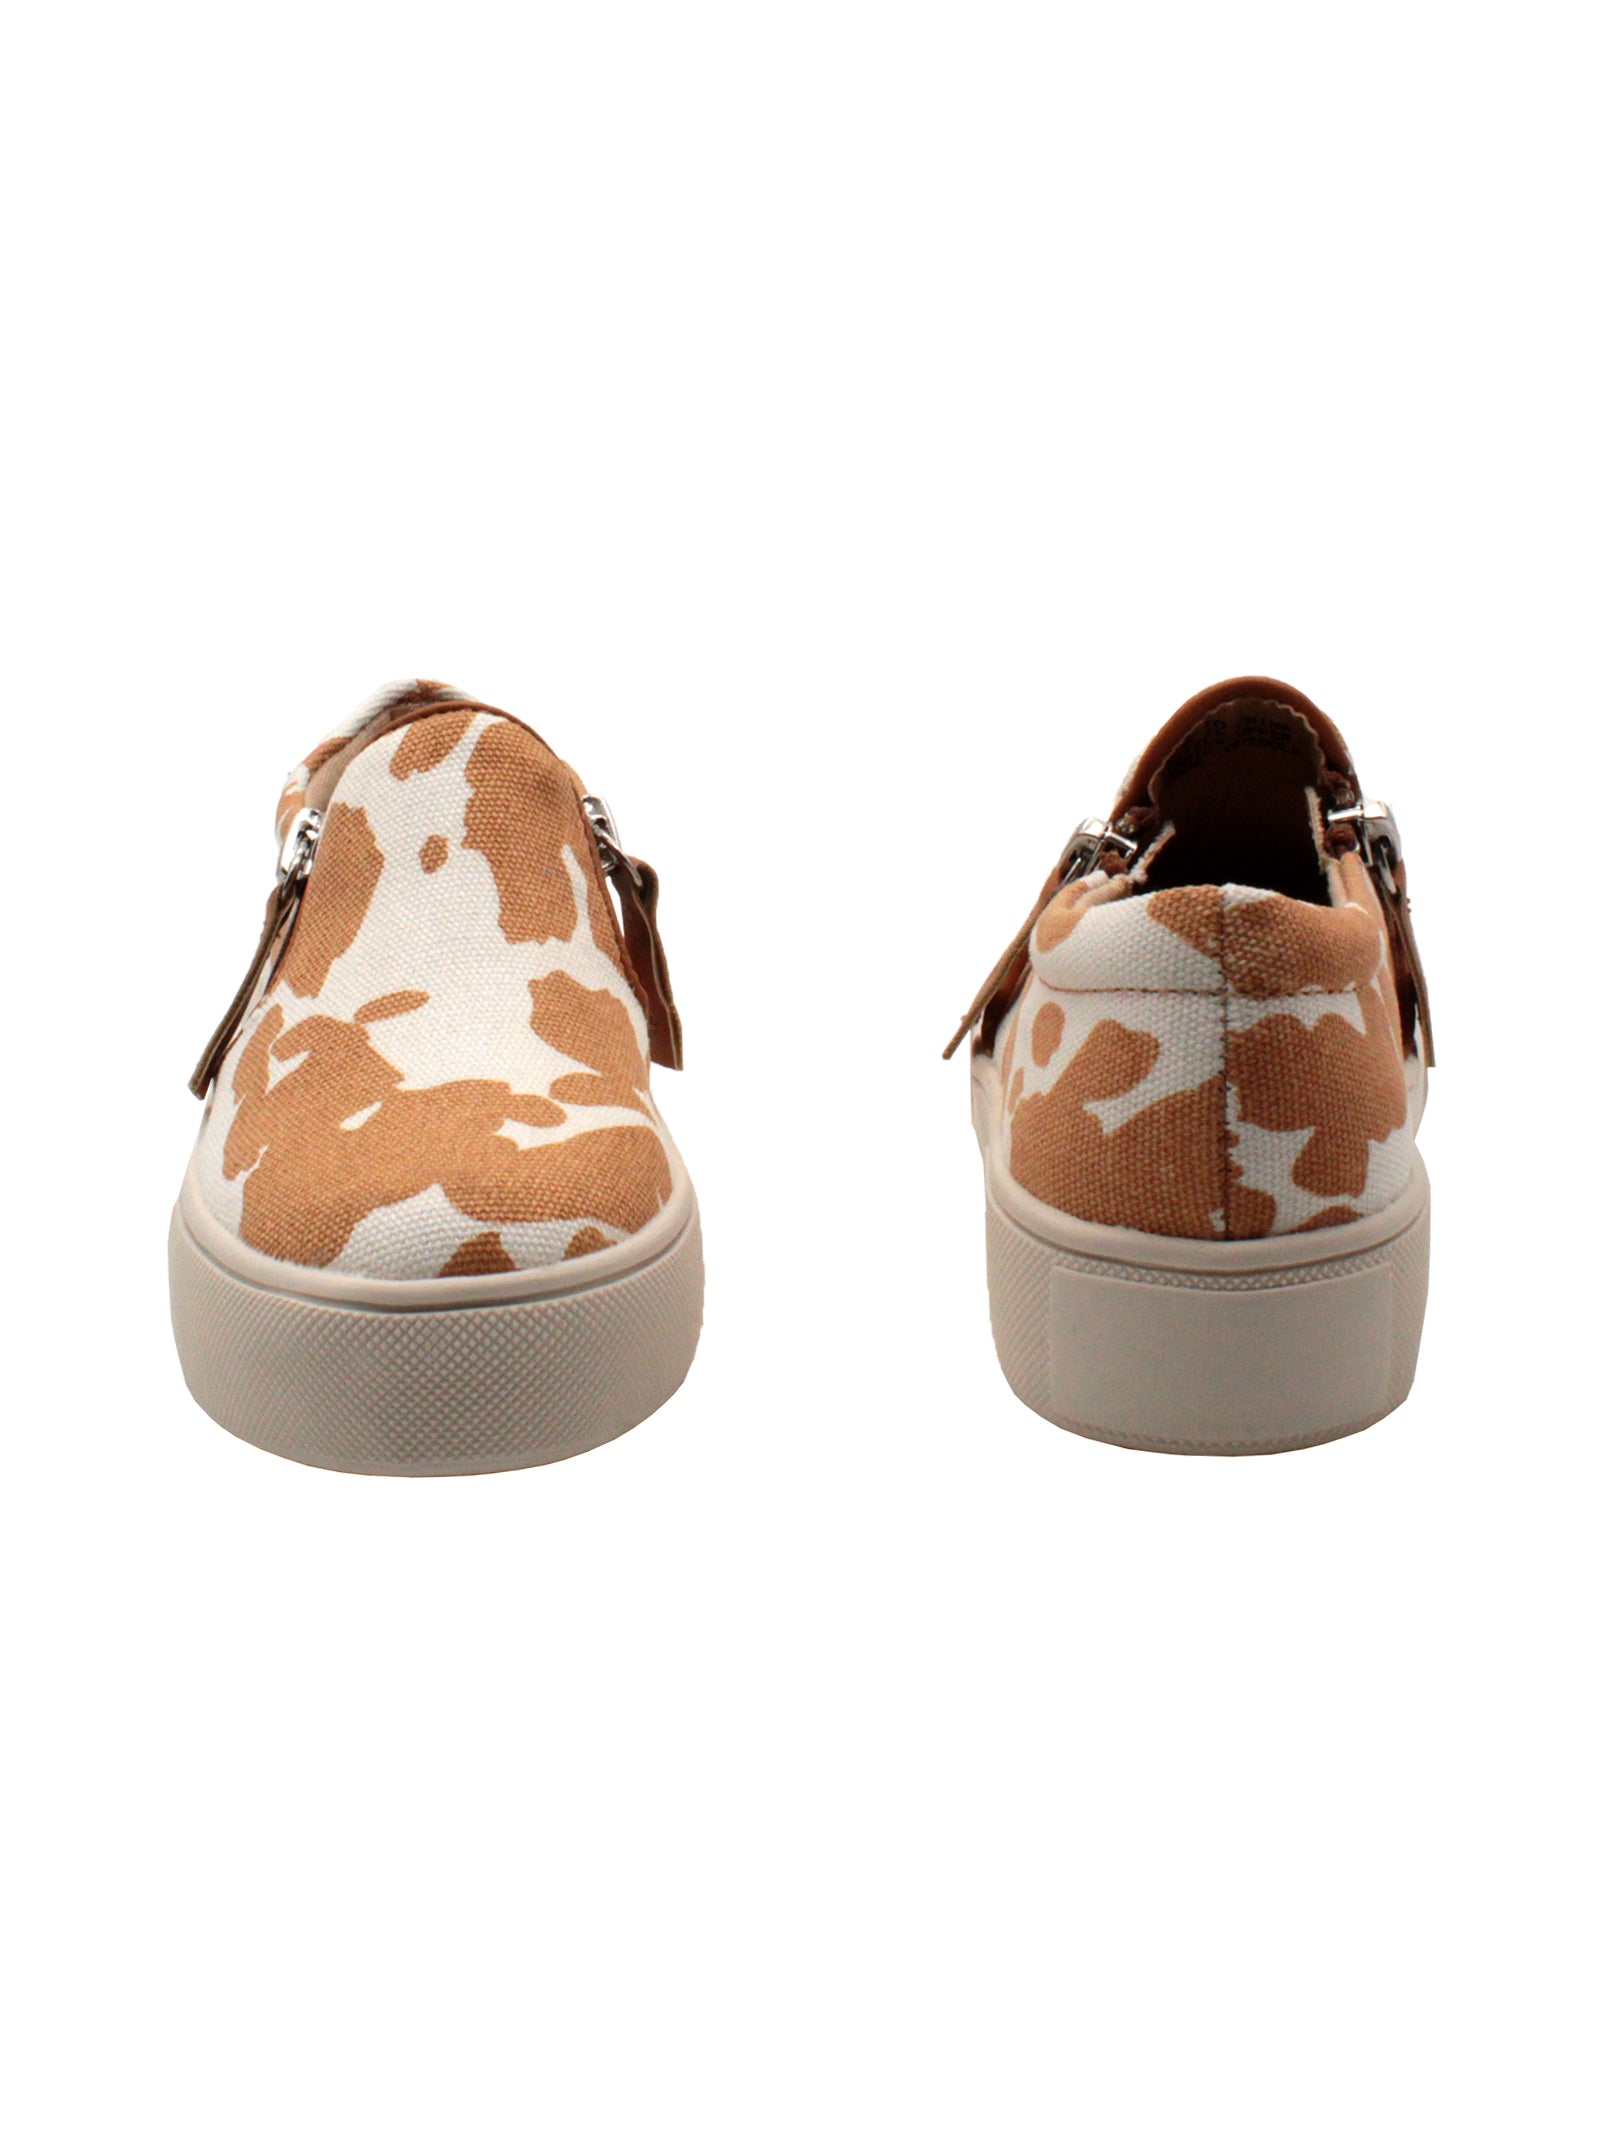 Volatile Kid’s ‘Chorus’ brown cow double zipper sneaker in printed cotton canvas is designed to easily slip on and off. They feature a cushioned sock stationed on a textured rubber sneaker bottom that’s ready for all day play. Pair them with casual outfits and dress up looks alike. front and back